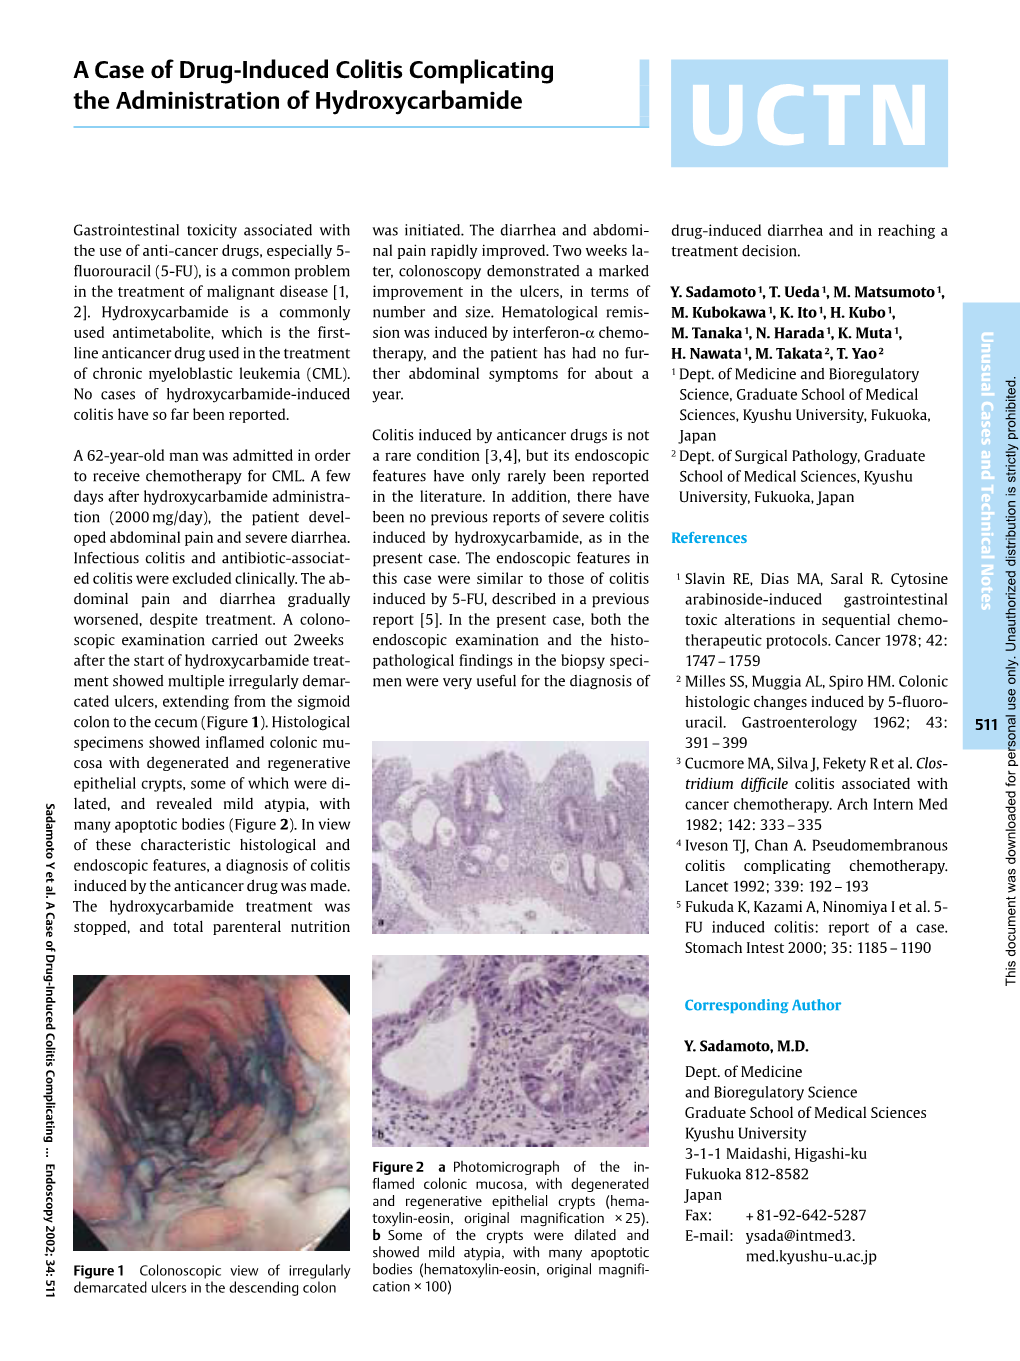 A Case of Drug-Induced Colitis Complicating the Administration Of